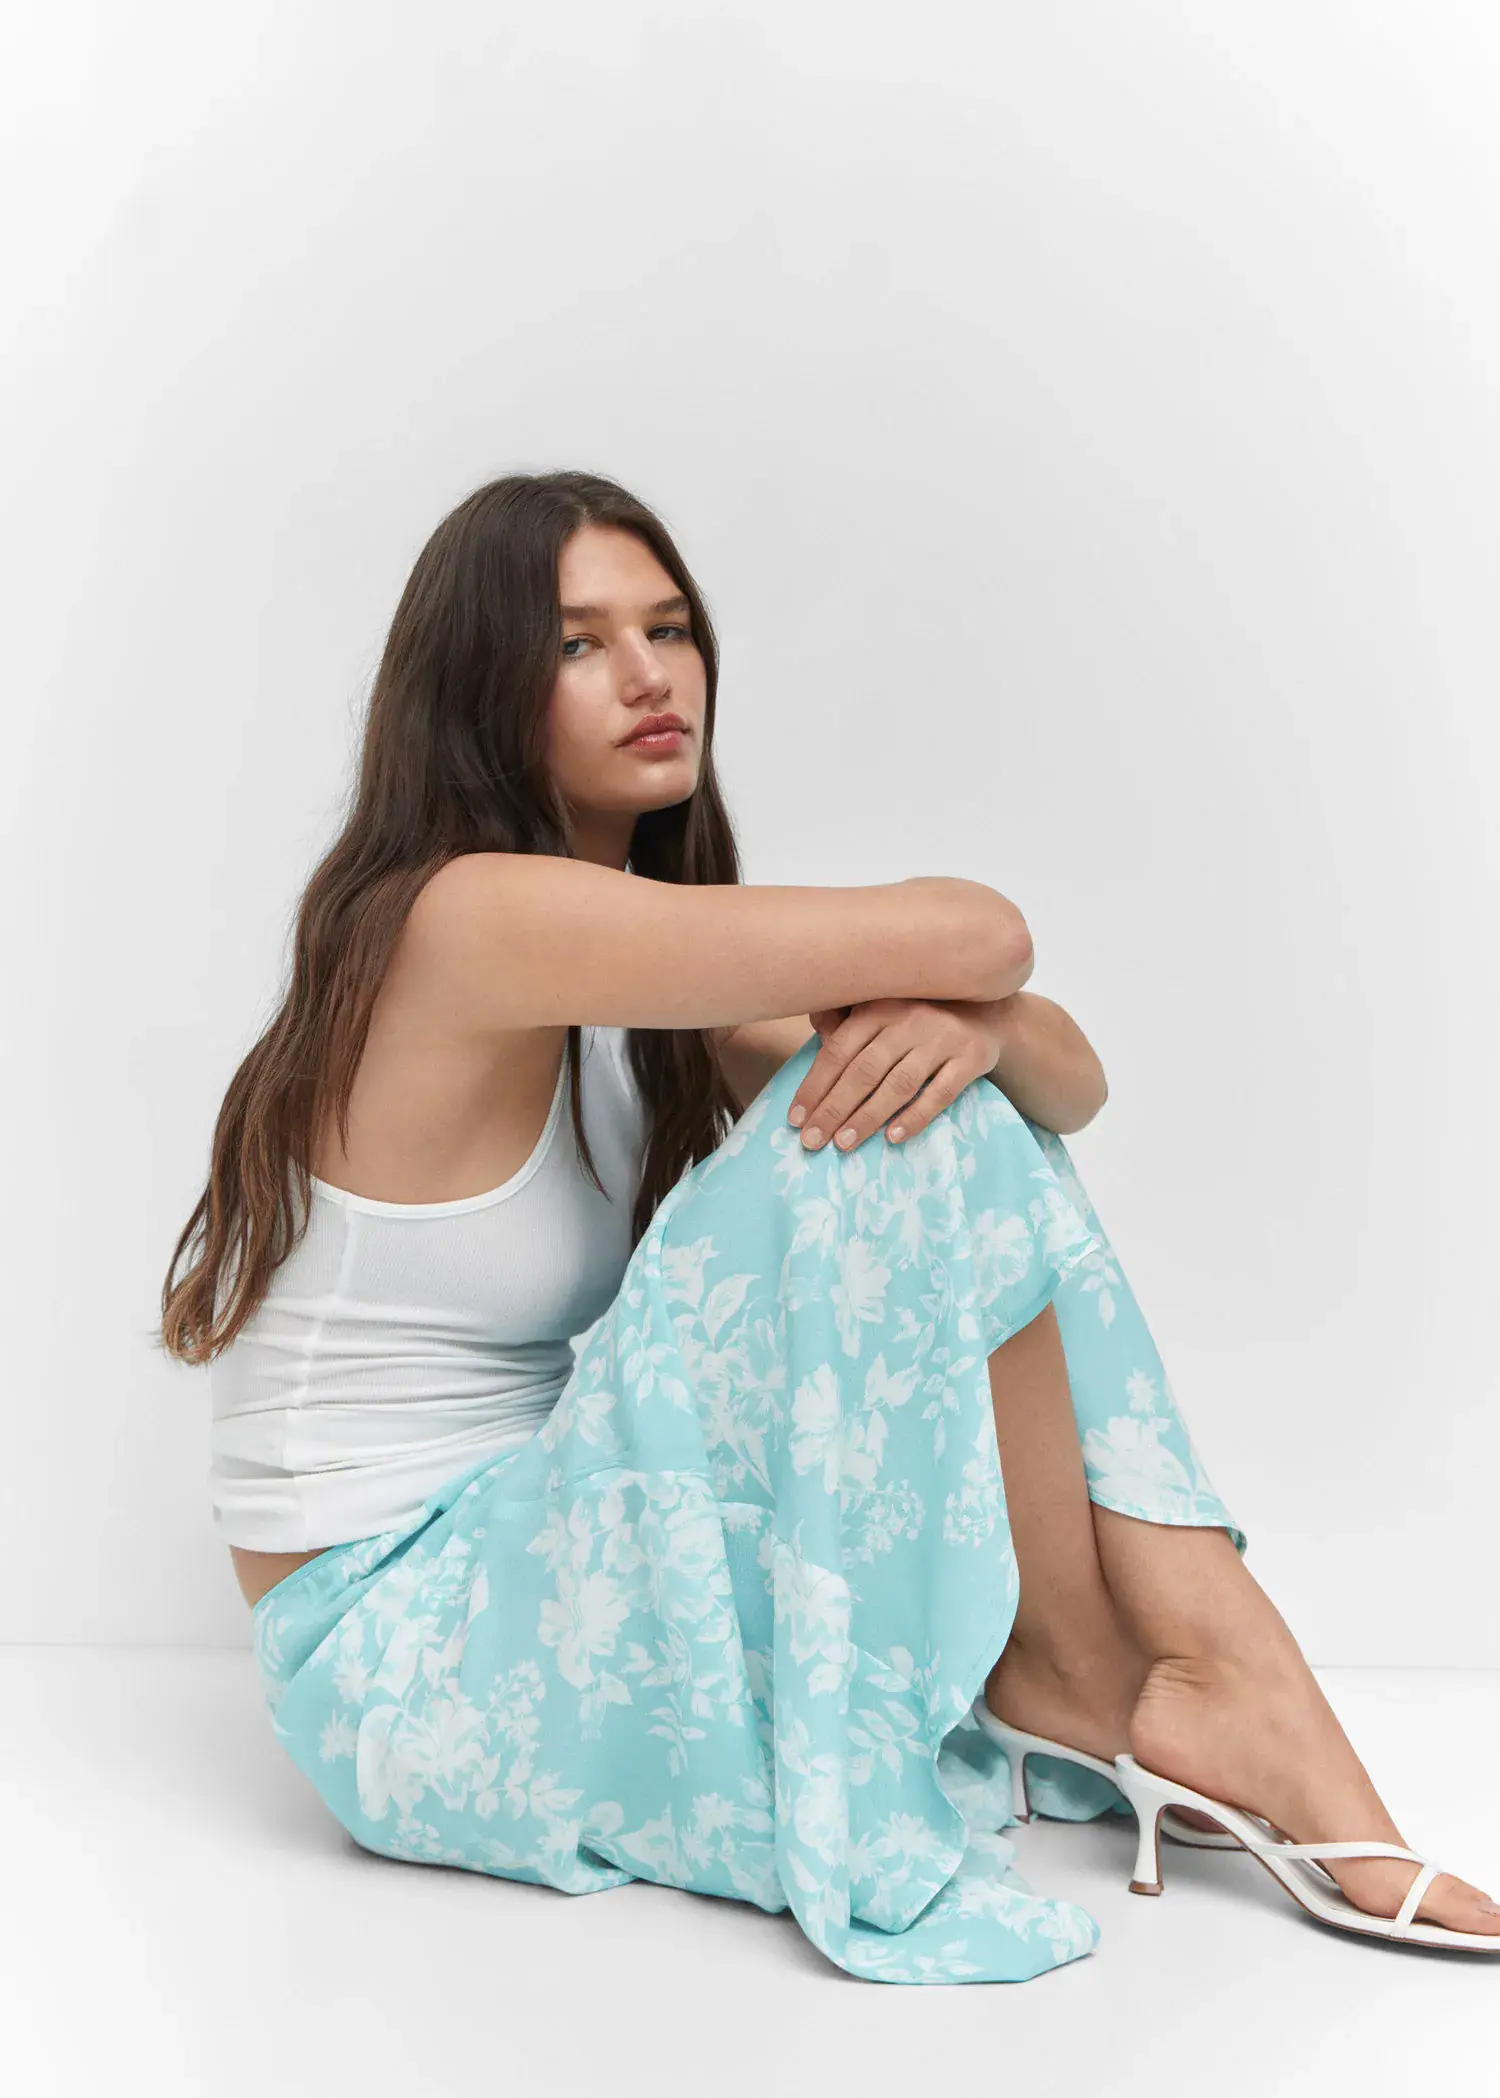 Mango Floral long skirt. a woman sitting on the ground wearing a white tank top. 